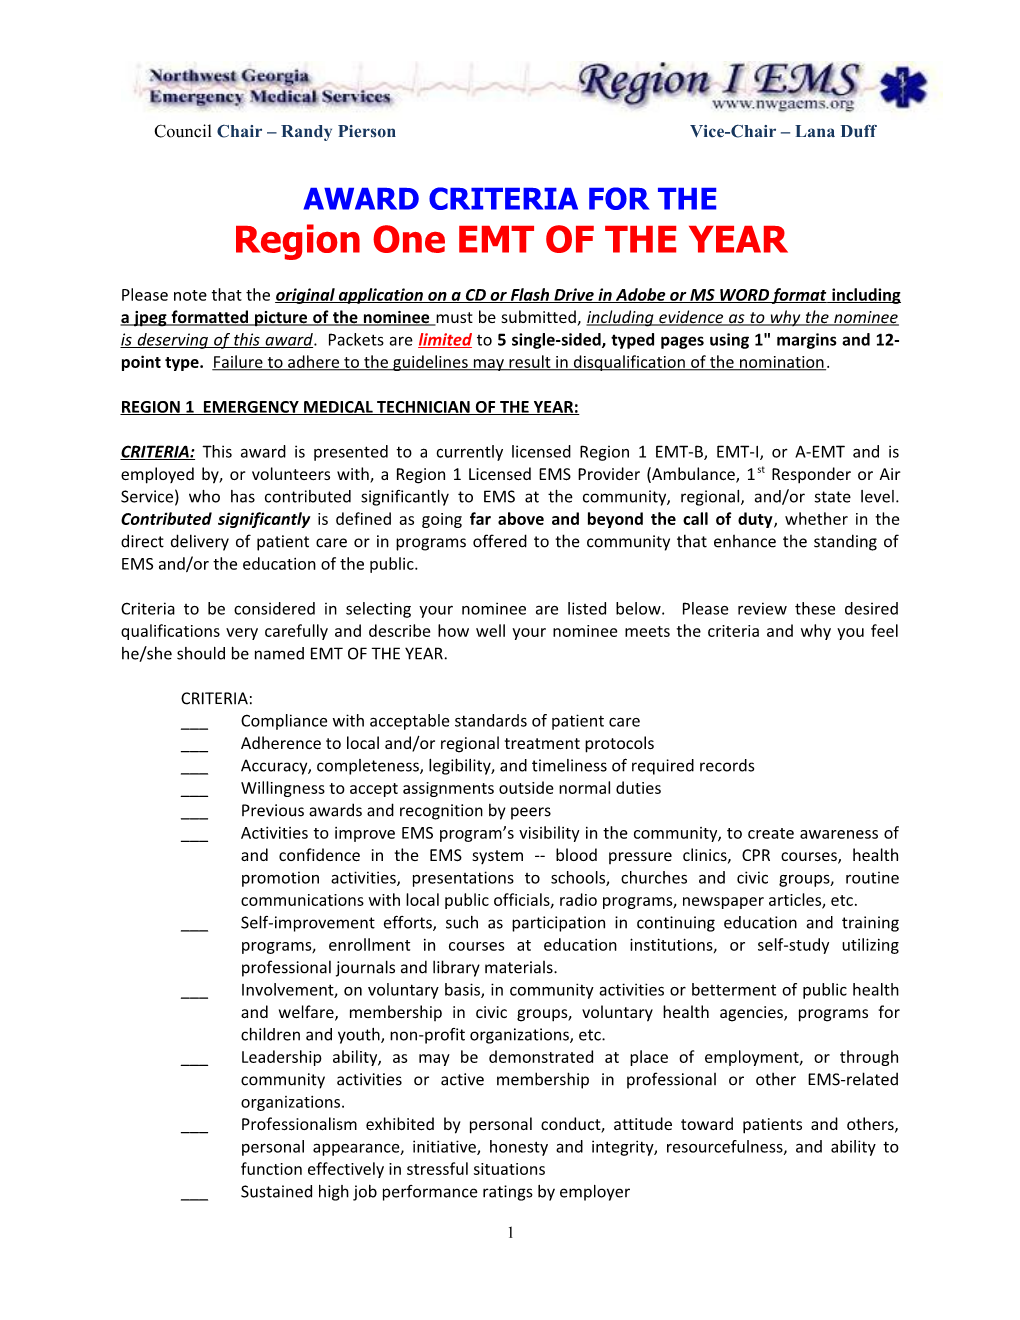 2005 Emt of the Year Award Criteria